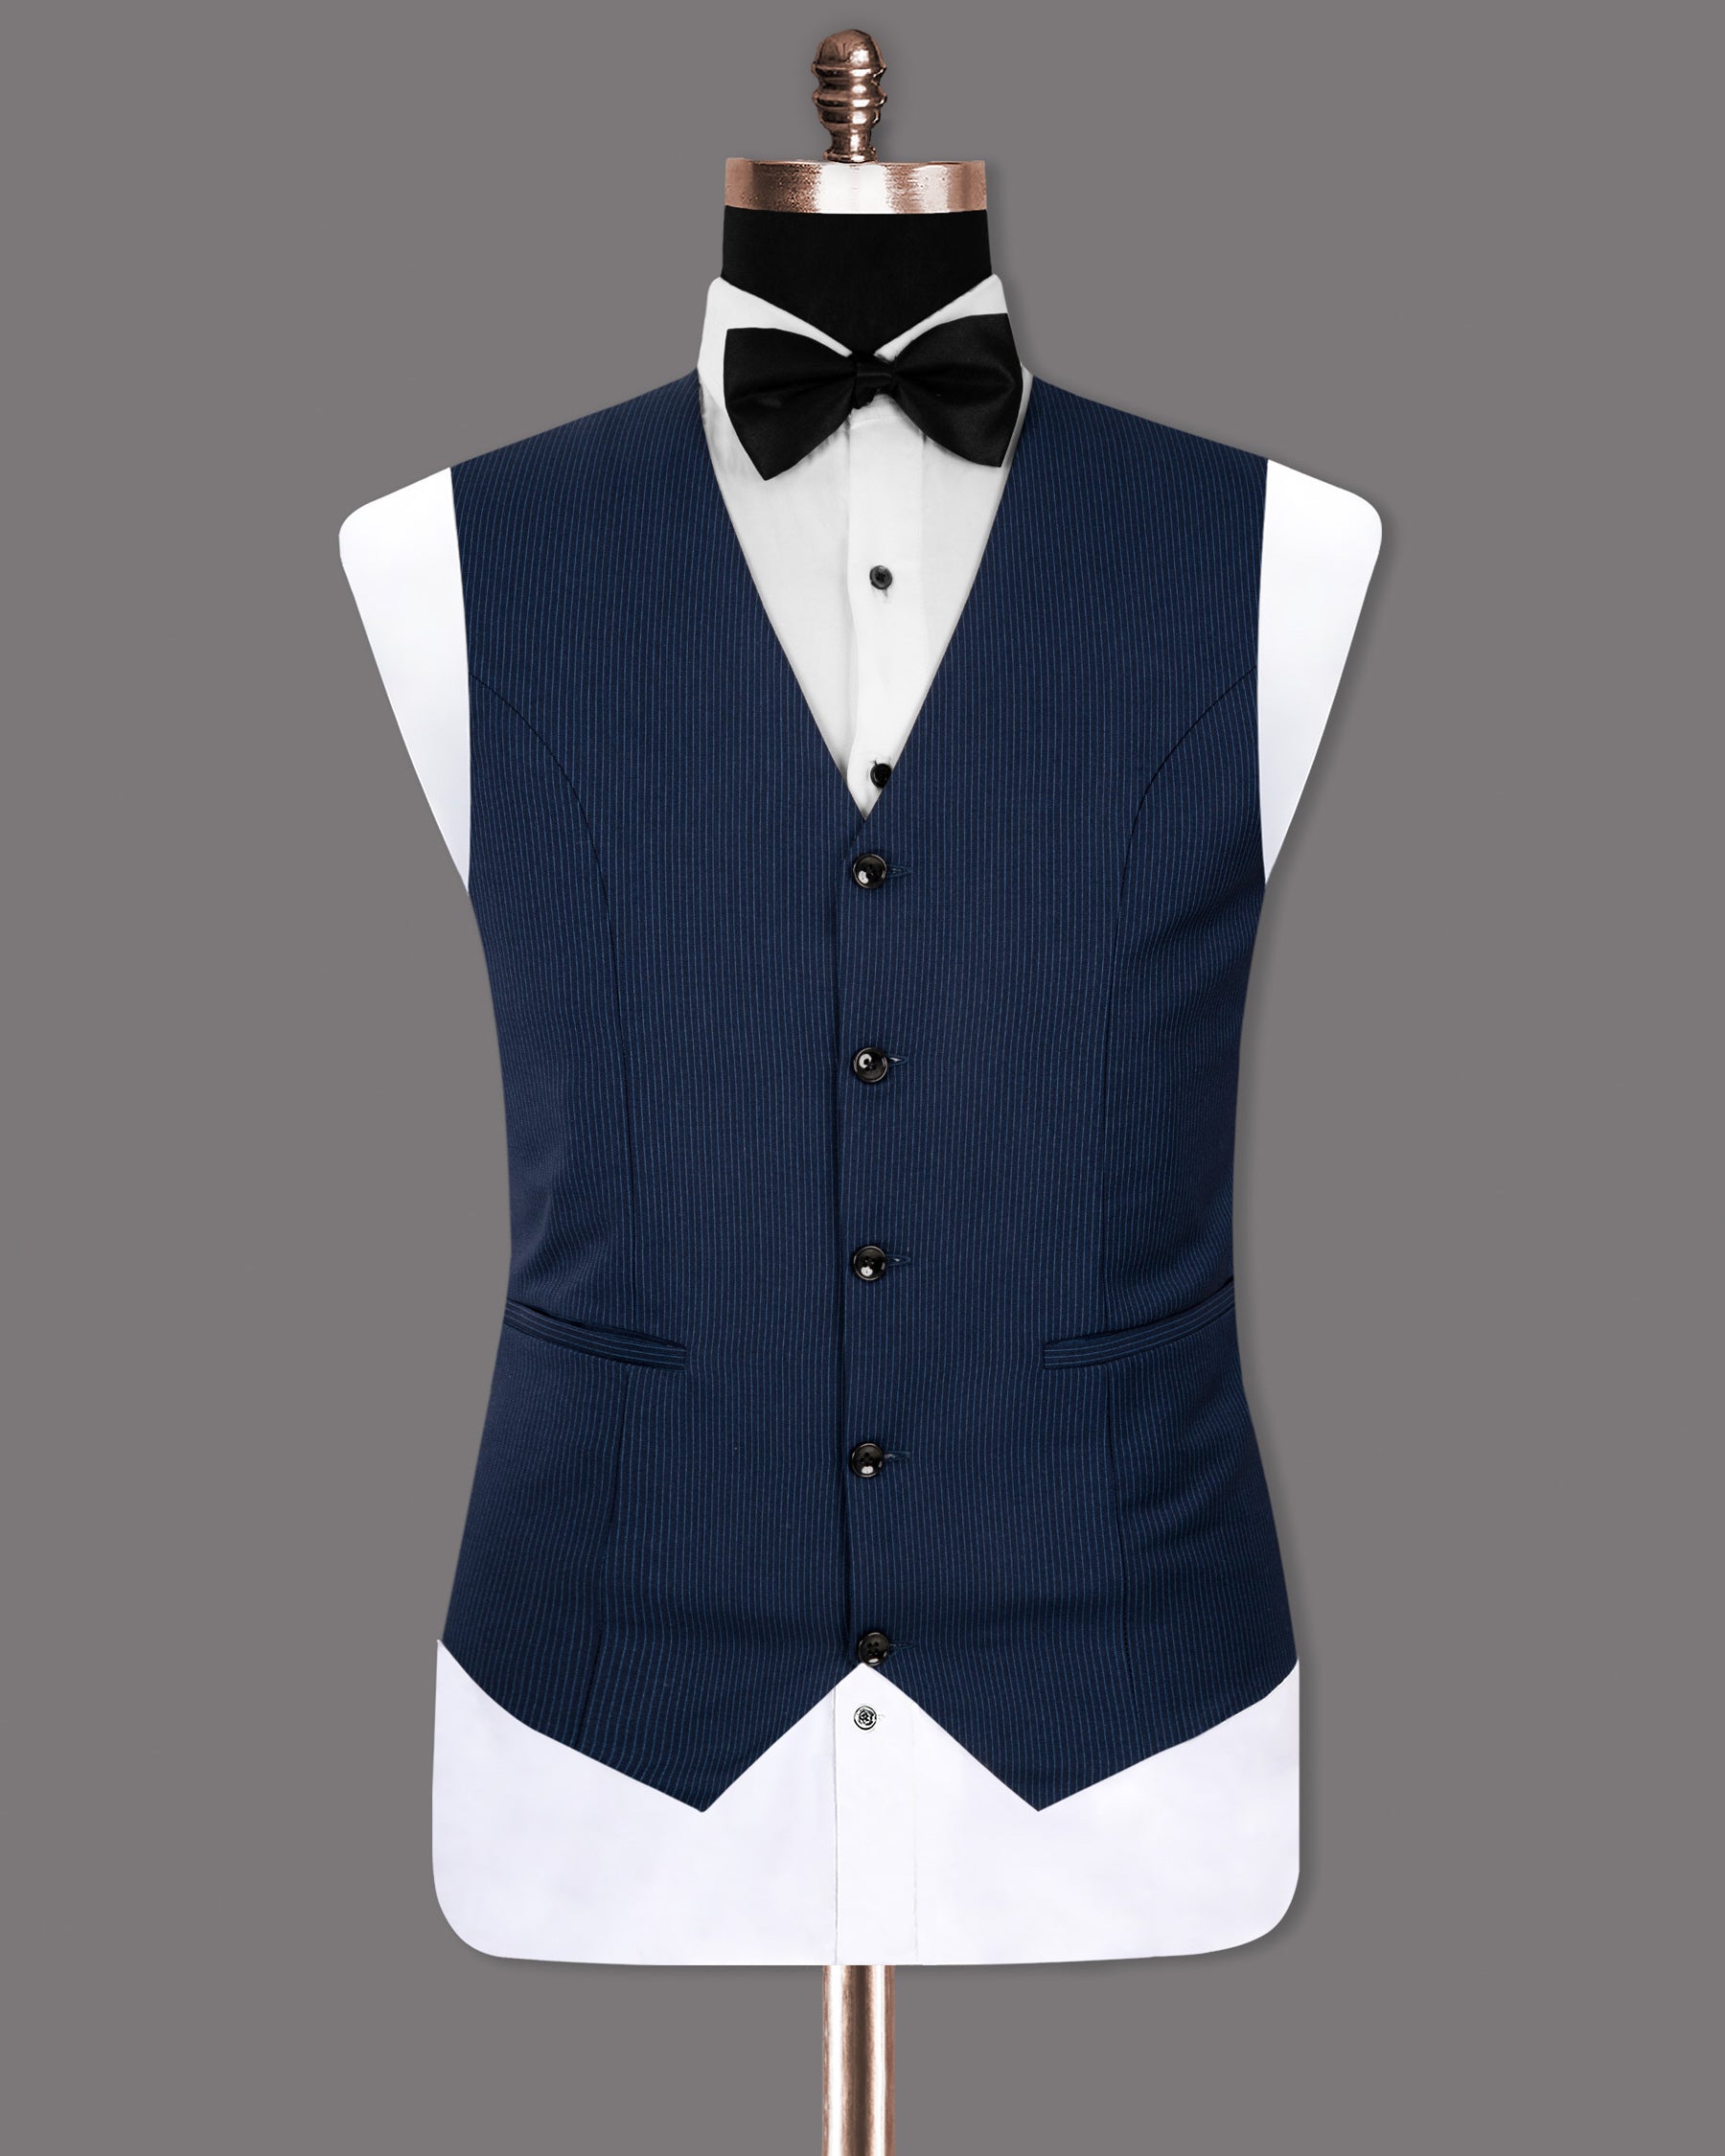 Midnight and Chambray blue Striped Woolrich Waistcoat V1272-36, V1272-38, V1272-40, V1272-42, V1272-44, V1272-46, V1272-48, V1272-50, V1272-52, V1272-54, V1272-56, V1272-58, V1272-60